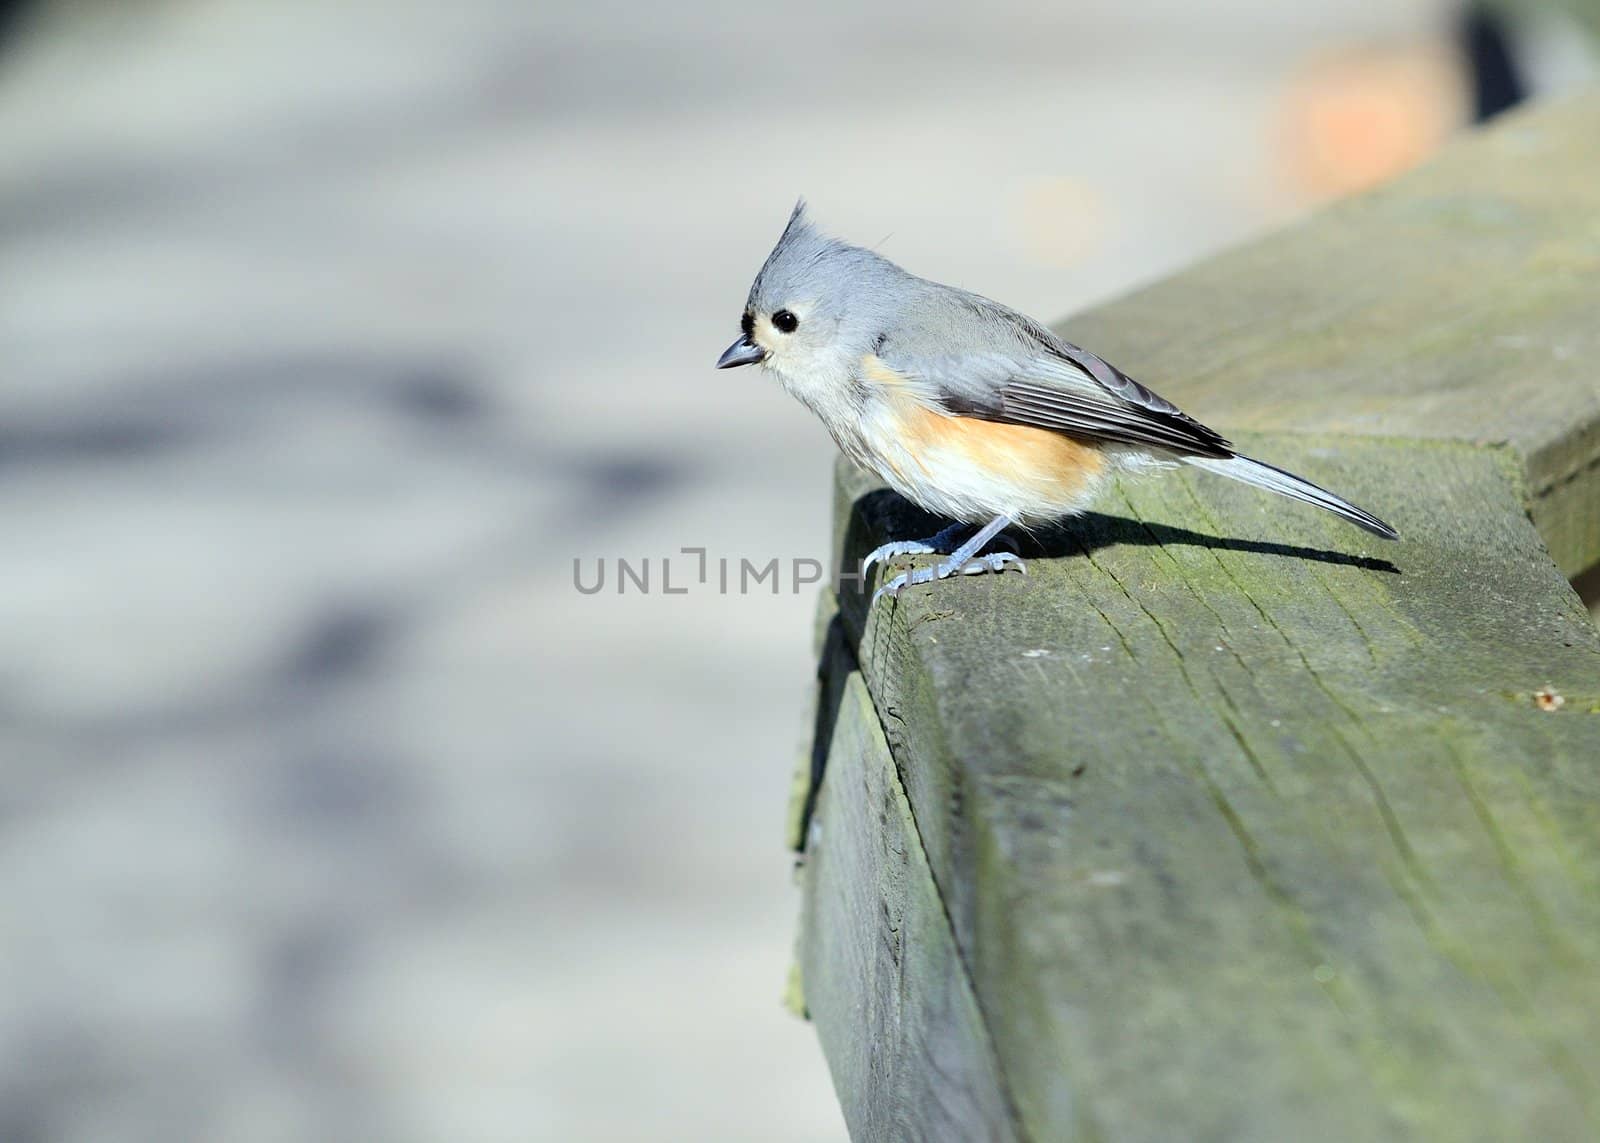 A tufted titmouse perched on a fence.